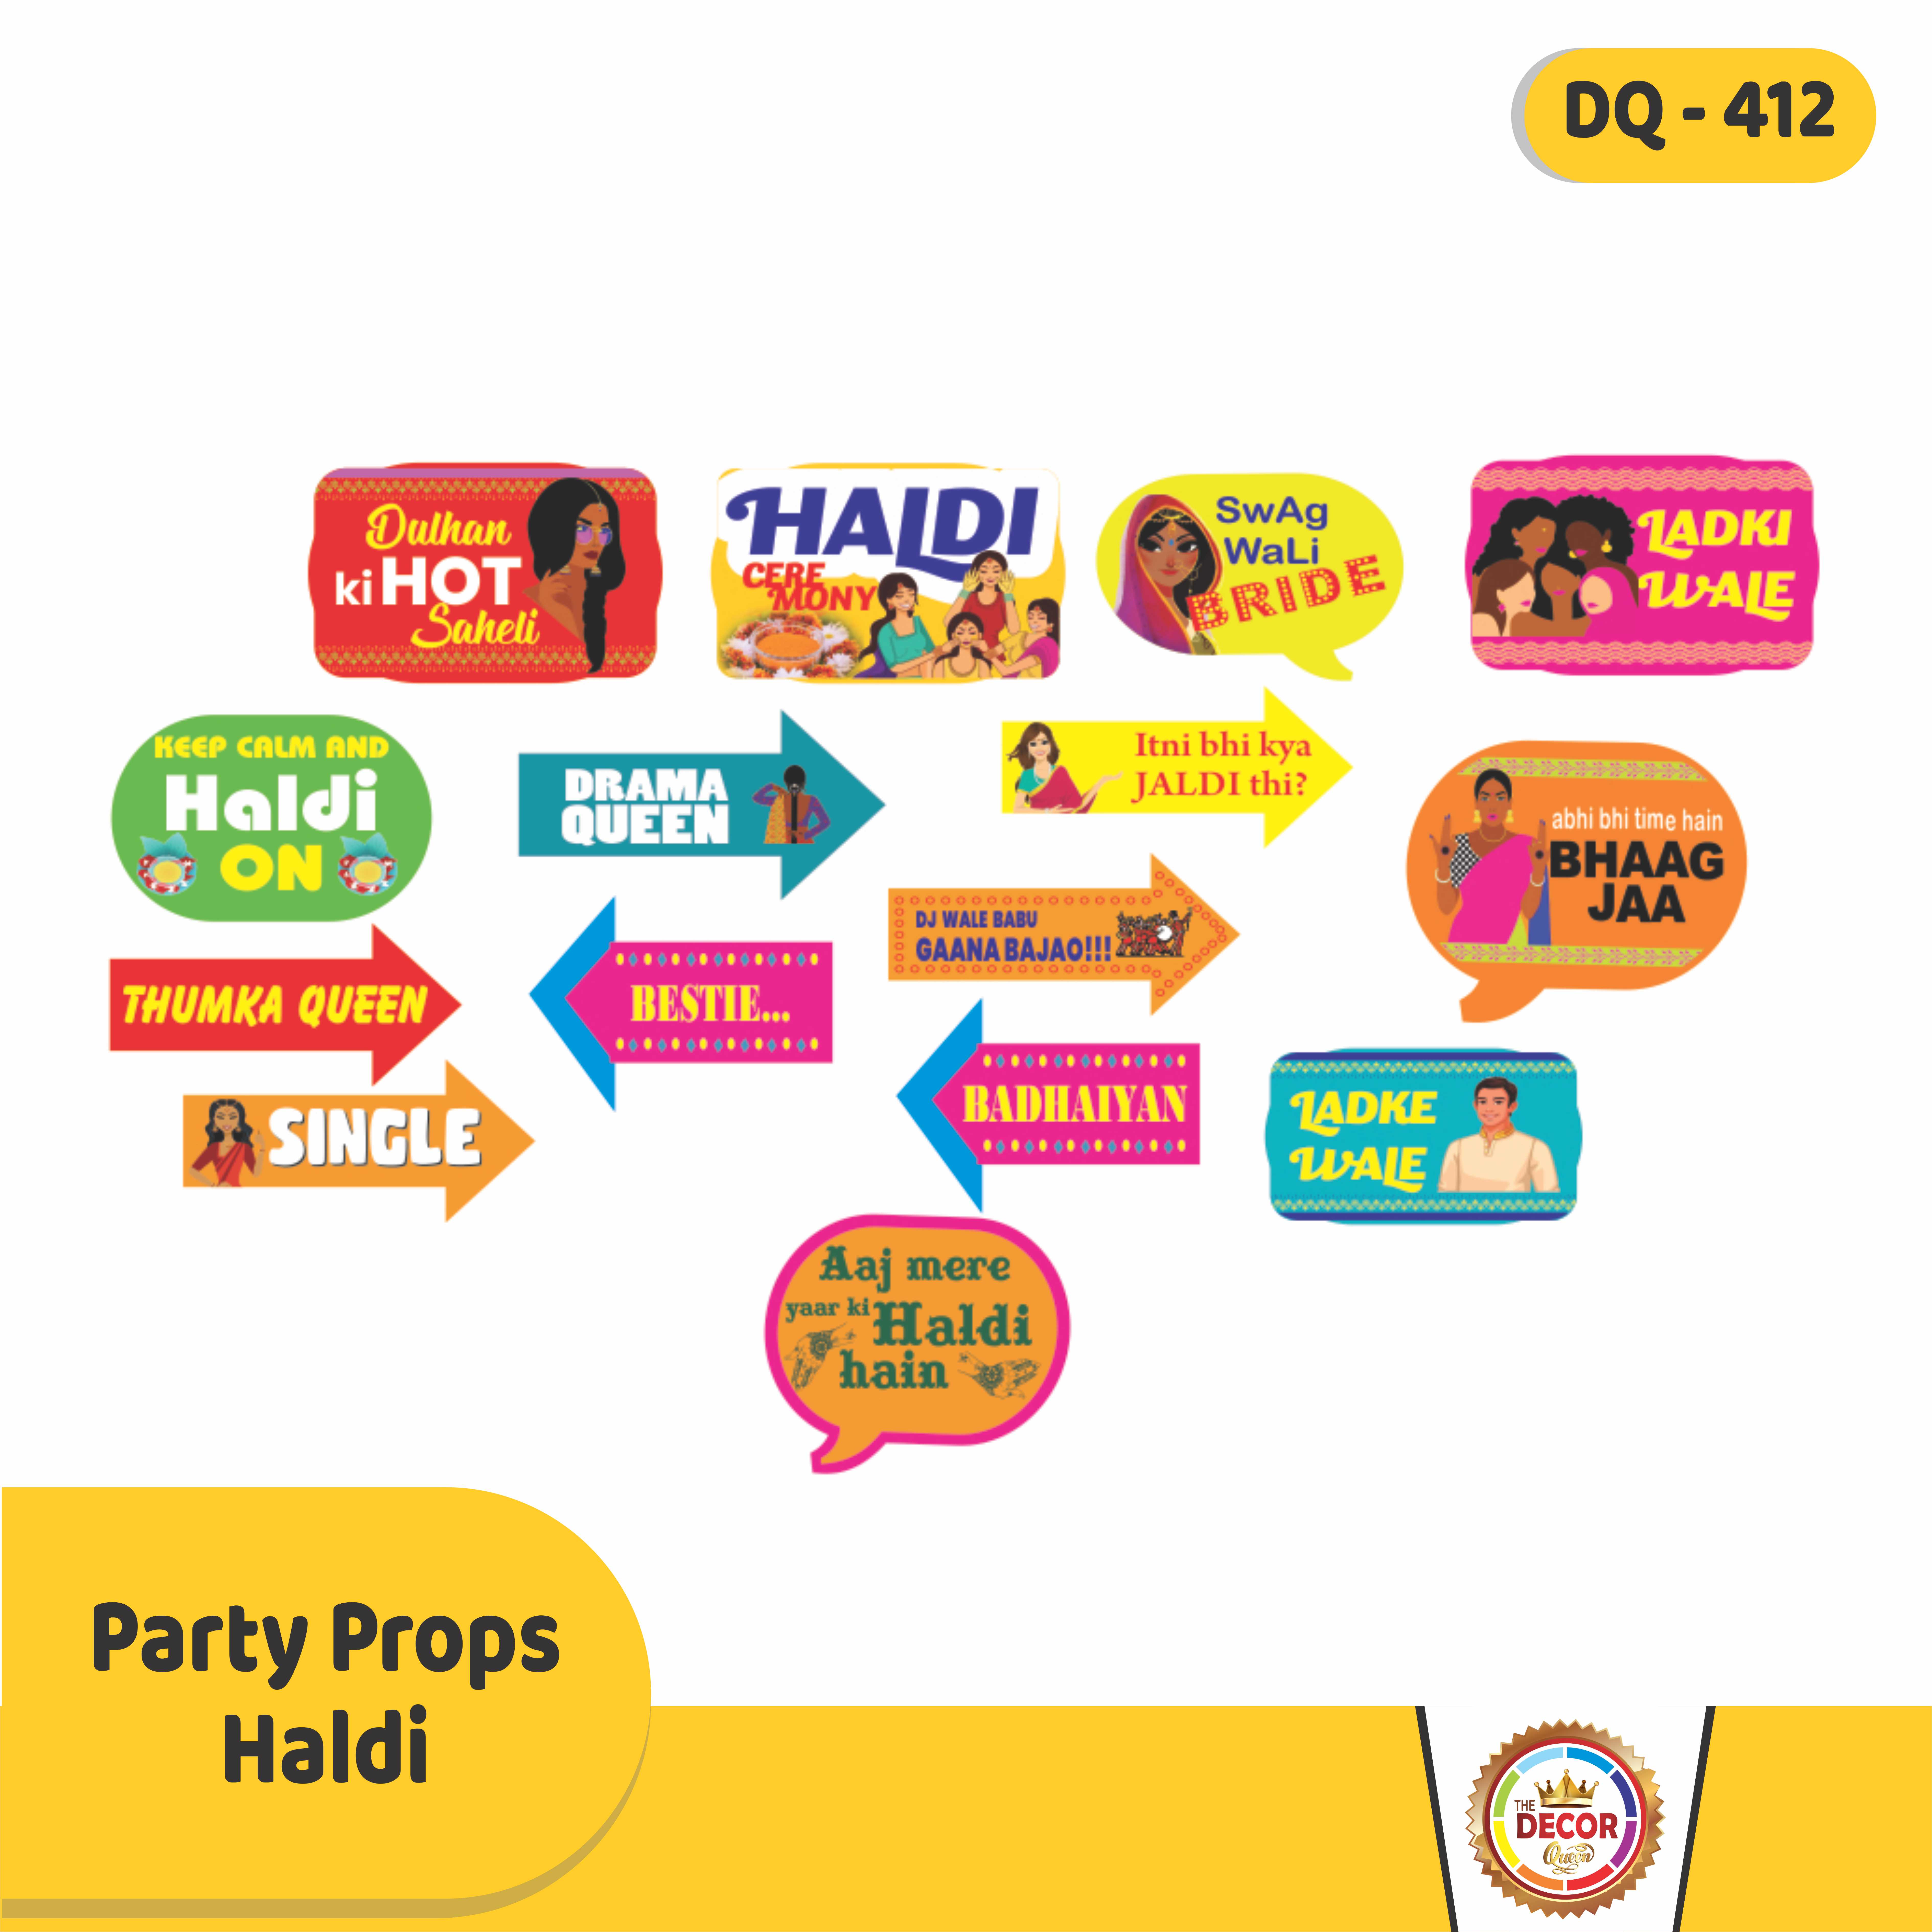 PARTY PROPS HALDI|Party Products|Party Props